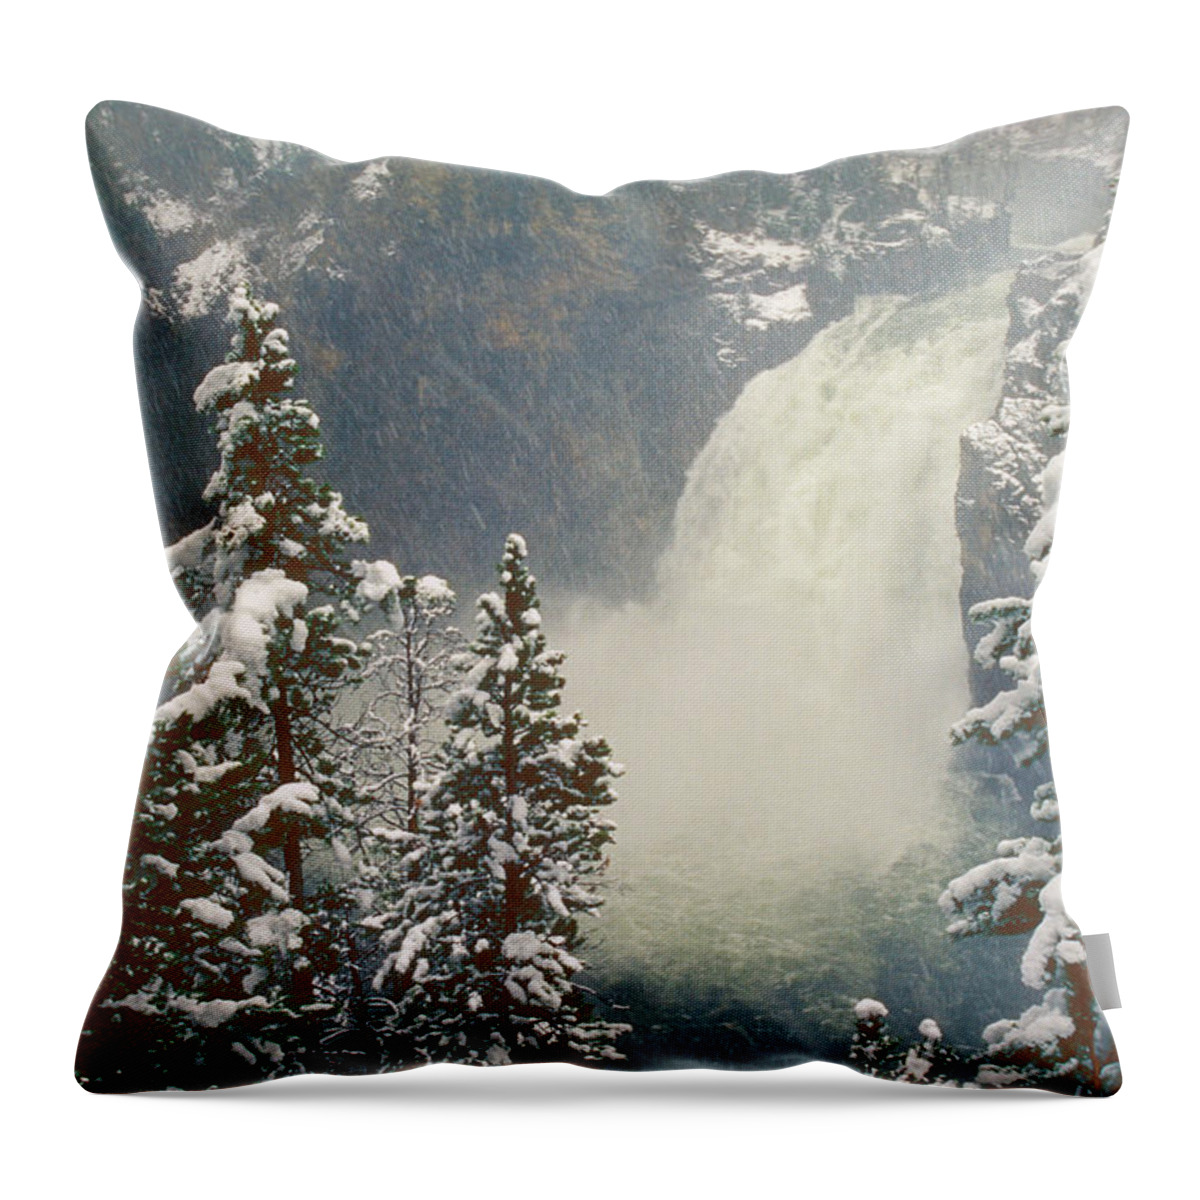 Waterfall Throw Pillow featuring the photograph Yellowstone Upper Falls Snowstorm by John Burk